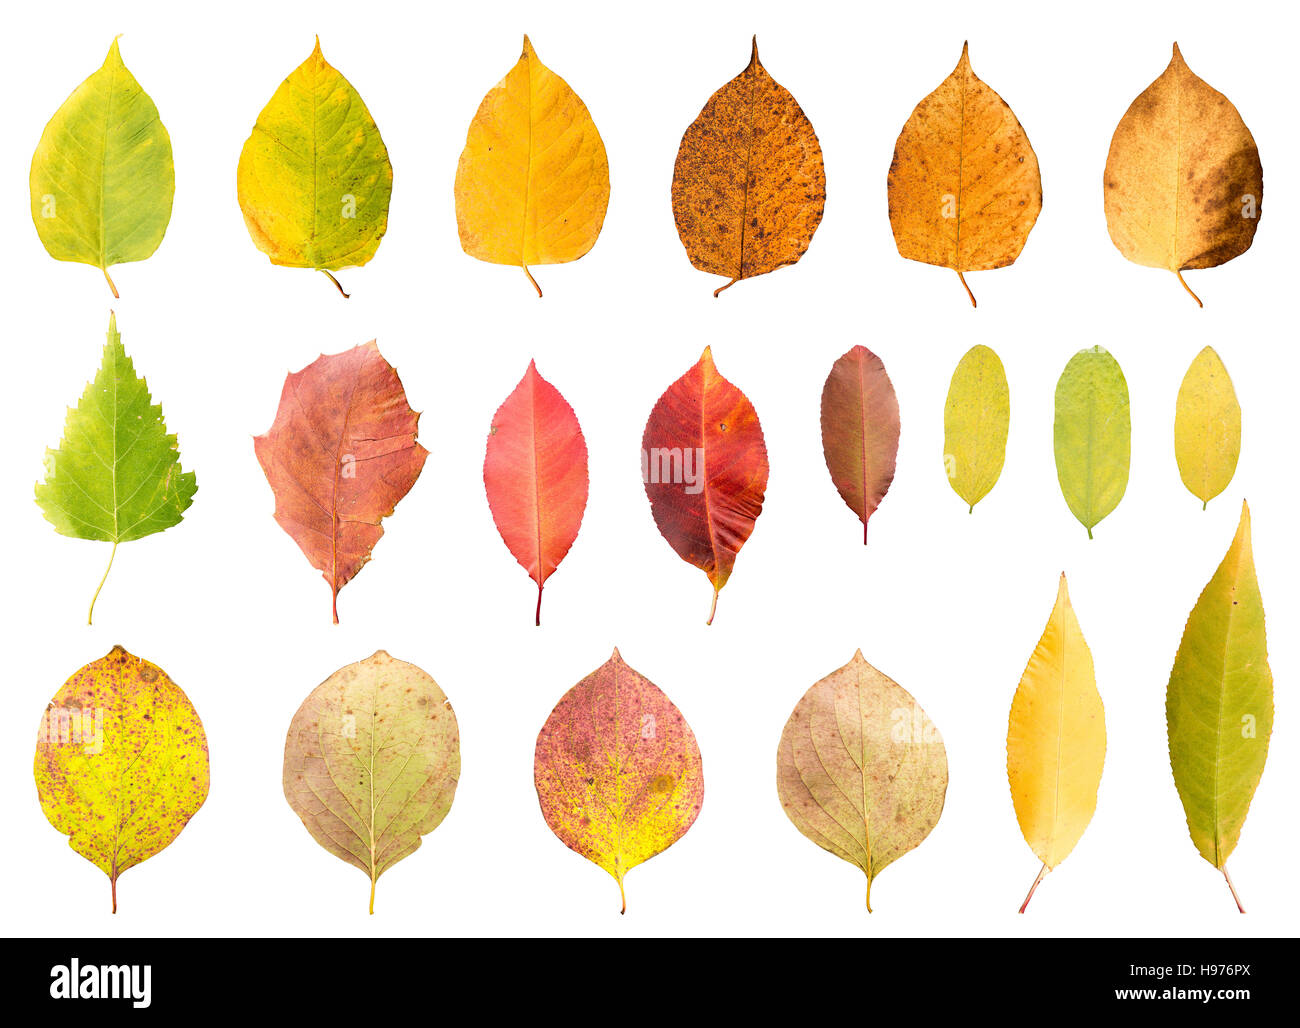 Collection of different leaves in different stades of withering ...